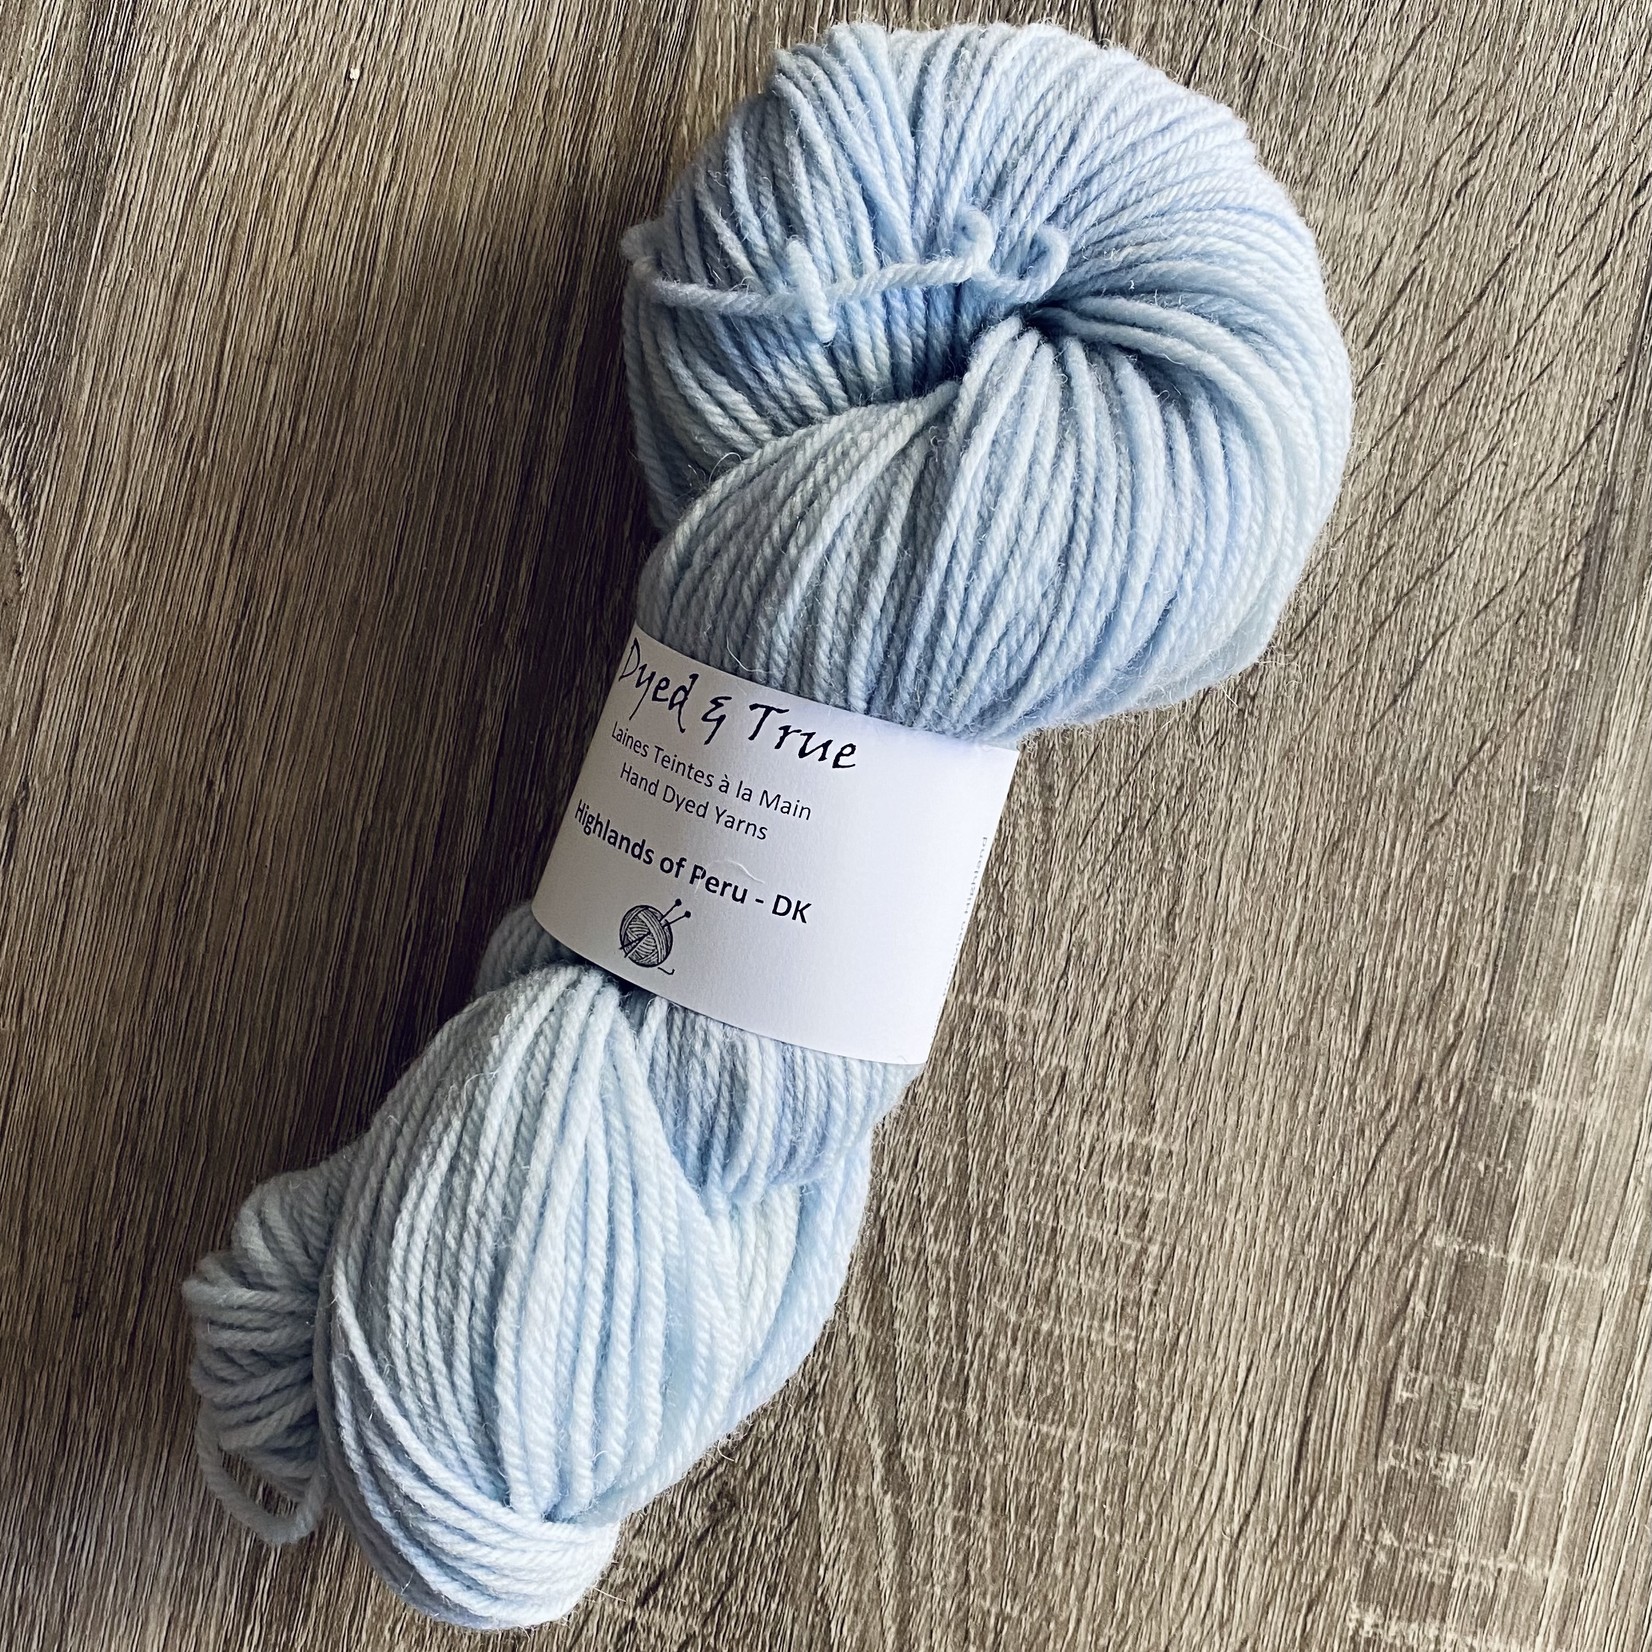 Dyed & True Dyed & True - Highland Worsted